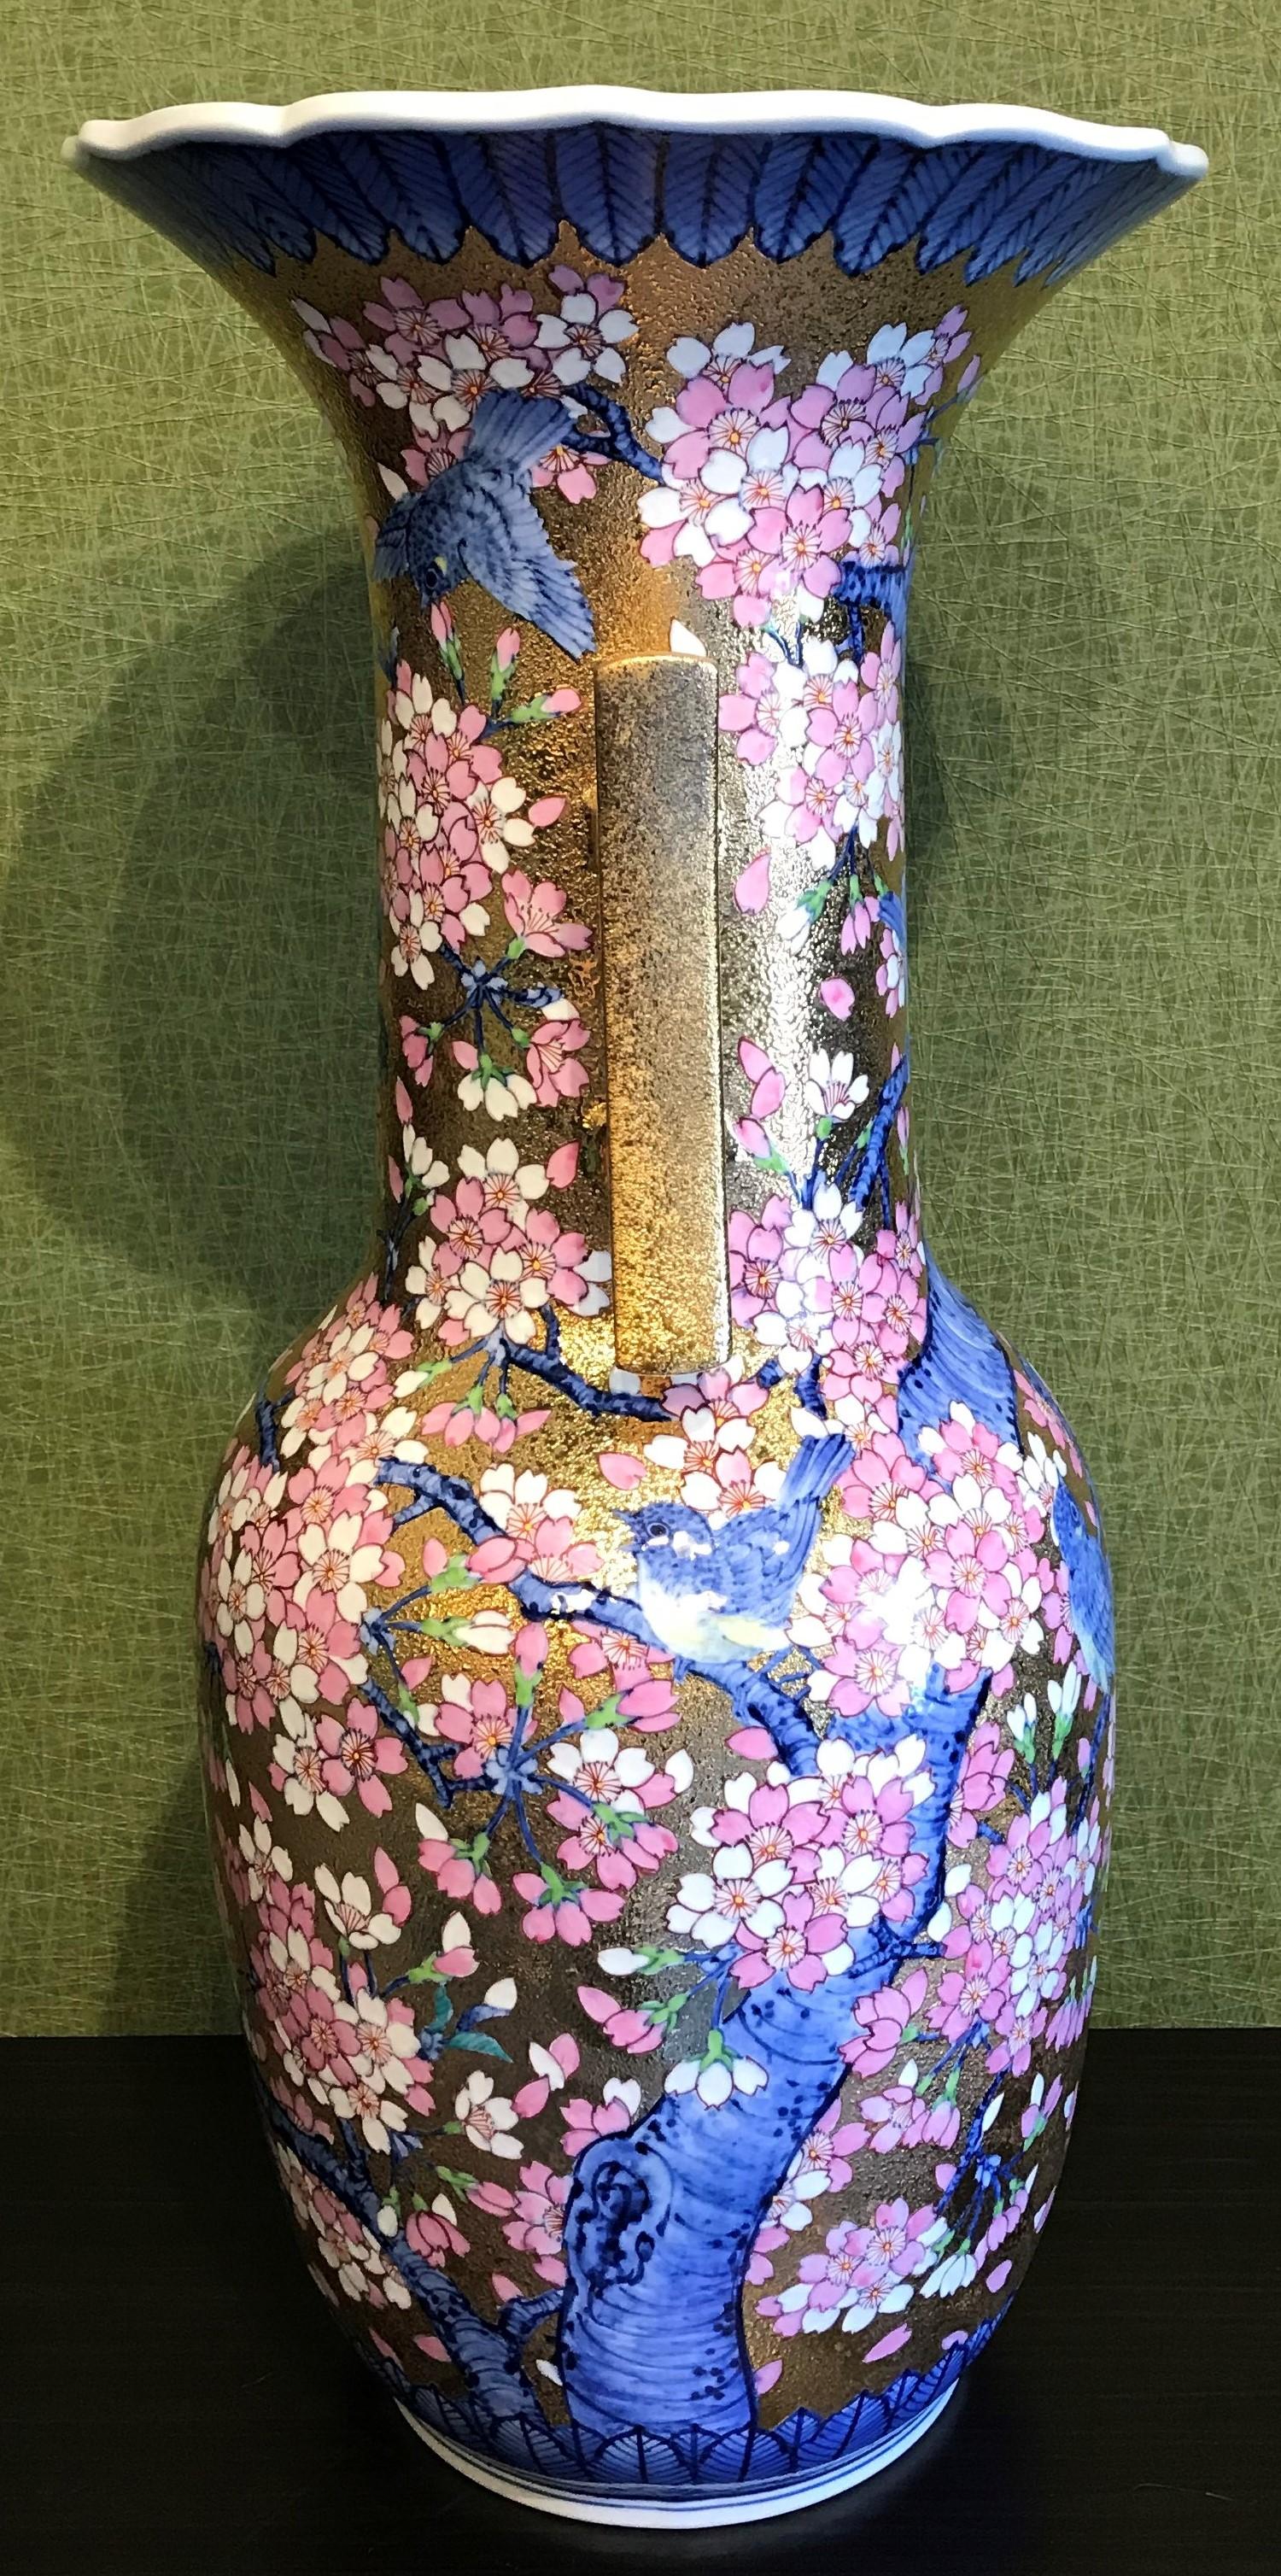 Extraordinary very large contemporary Japanese gilded porcelain vase with decorative handles, intricately hand painted in pink and blue on an opulently textured gold background. This piece is a masterpiece by highly respected award-winning master